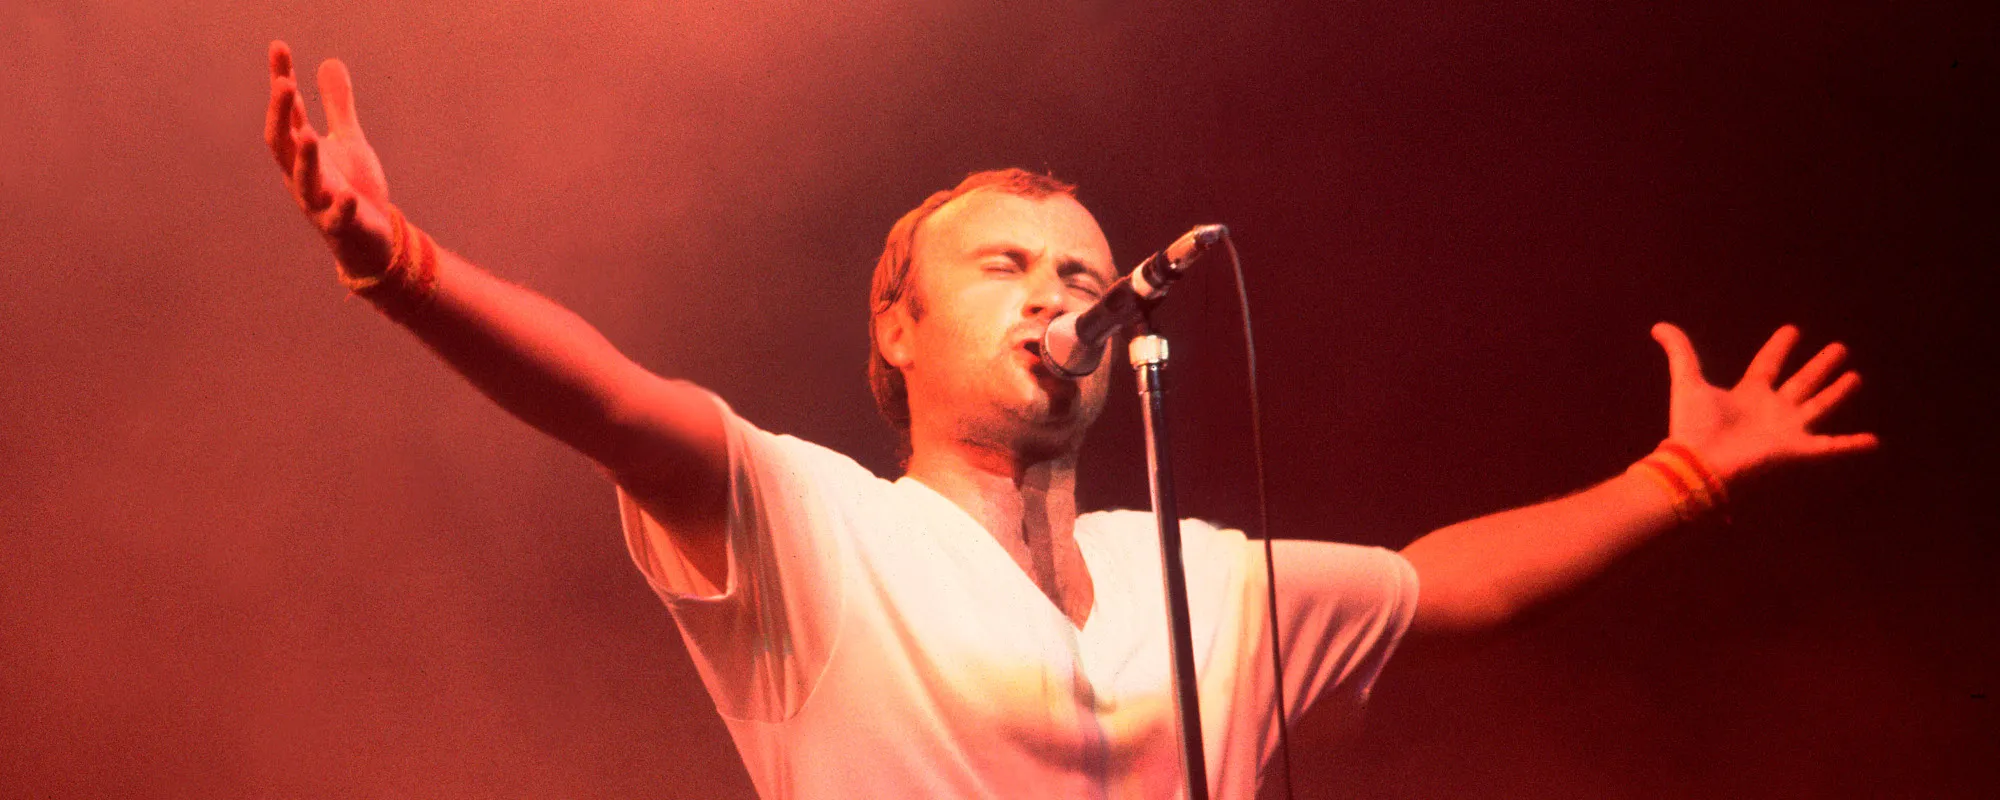 3 Songs You Didn’t Know Phil Collins Wrote for Genesis